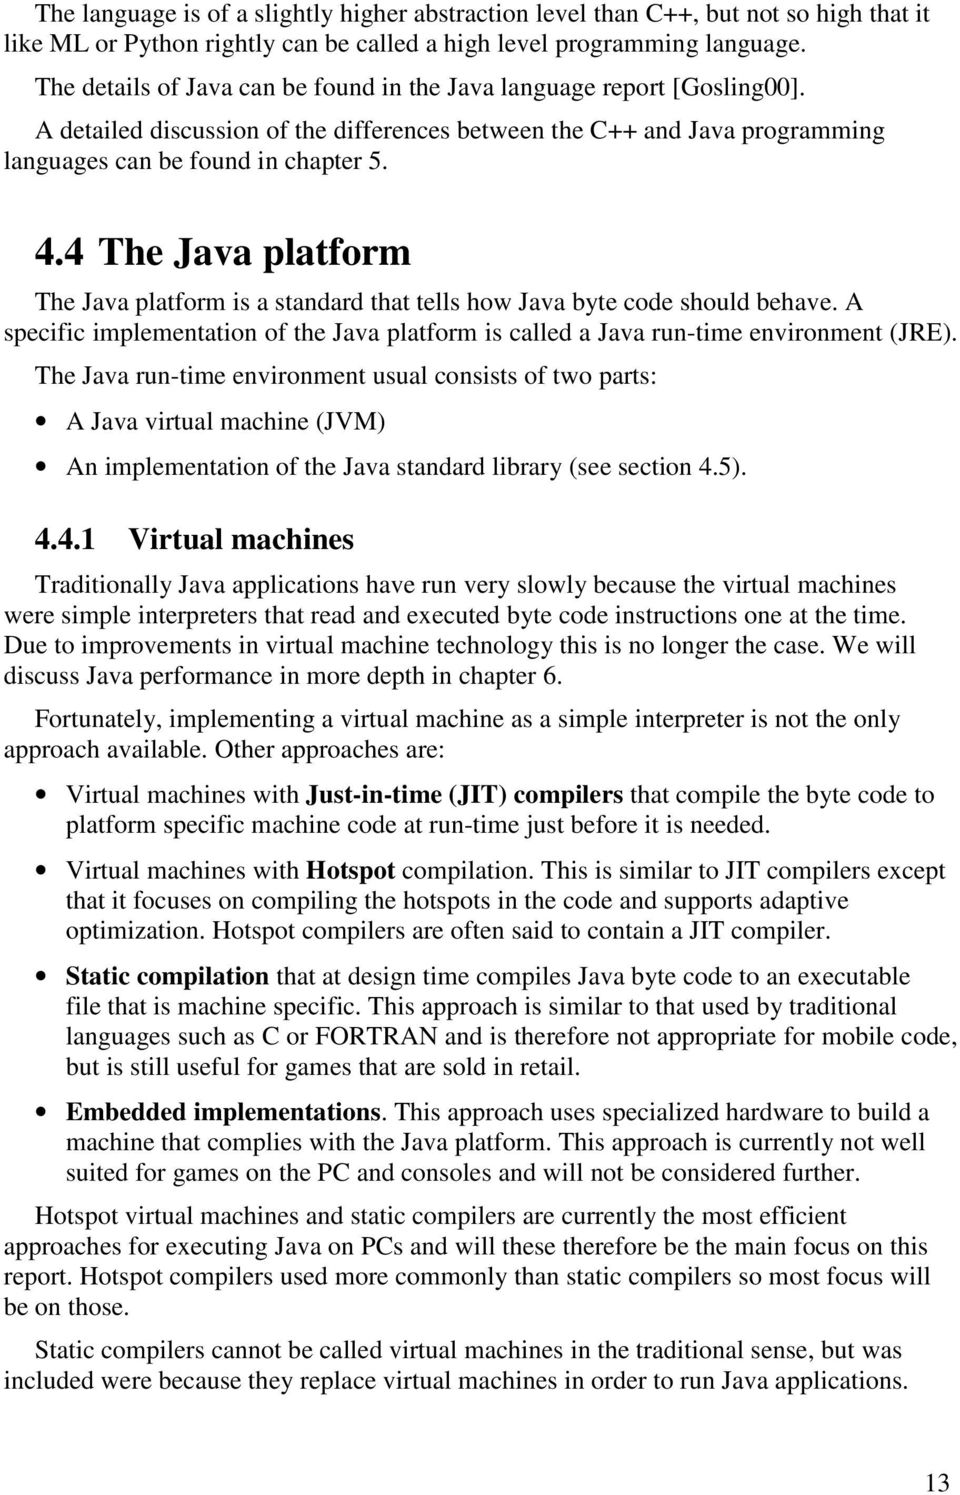 4 The Java platform The Java platform is a standard that tells how Java byte code should behave. A specific implementation of the Java platform is called a Java run-time environment (JRE).